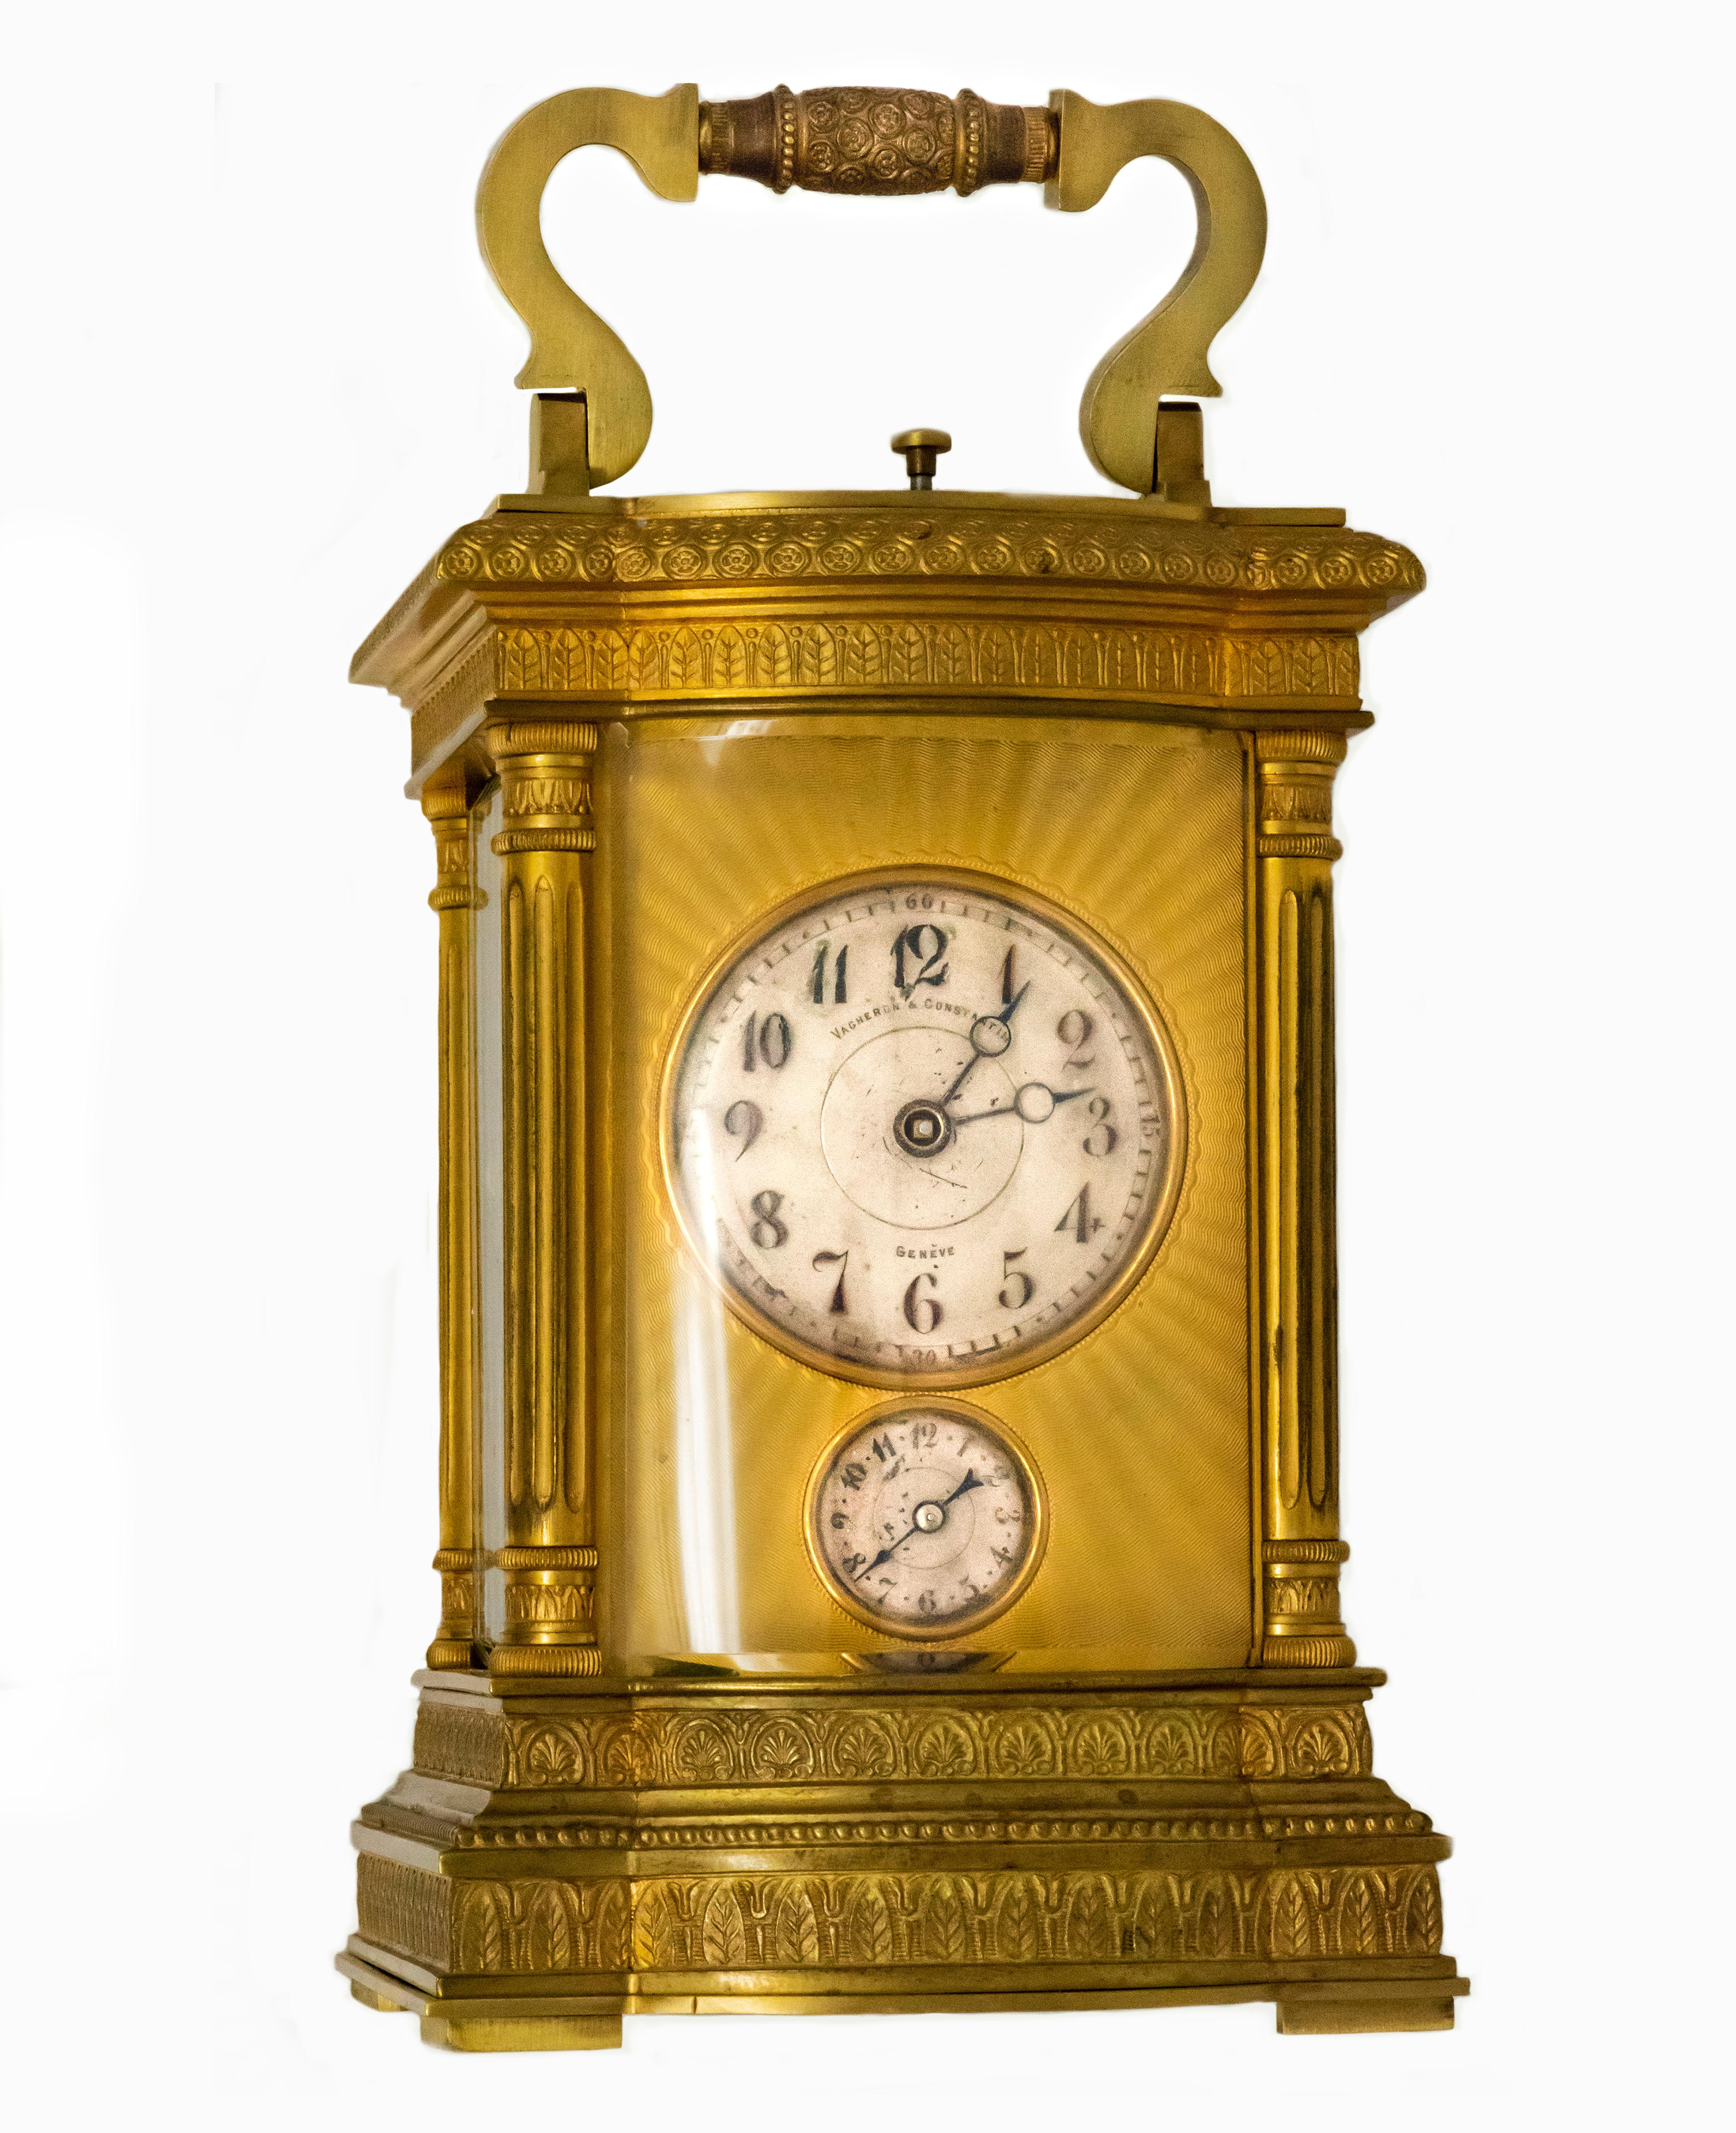 The present clock is a very rare and large, exceptional museum quality quarter hour repeating Vacheron & Constantin carriage Clock with classical greco-roman neoclassical styling demonstrated by the columns located along the sides of the dial and